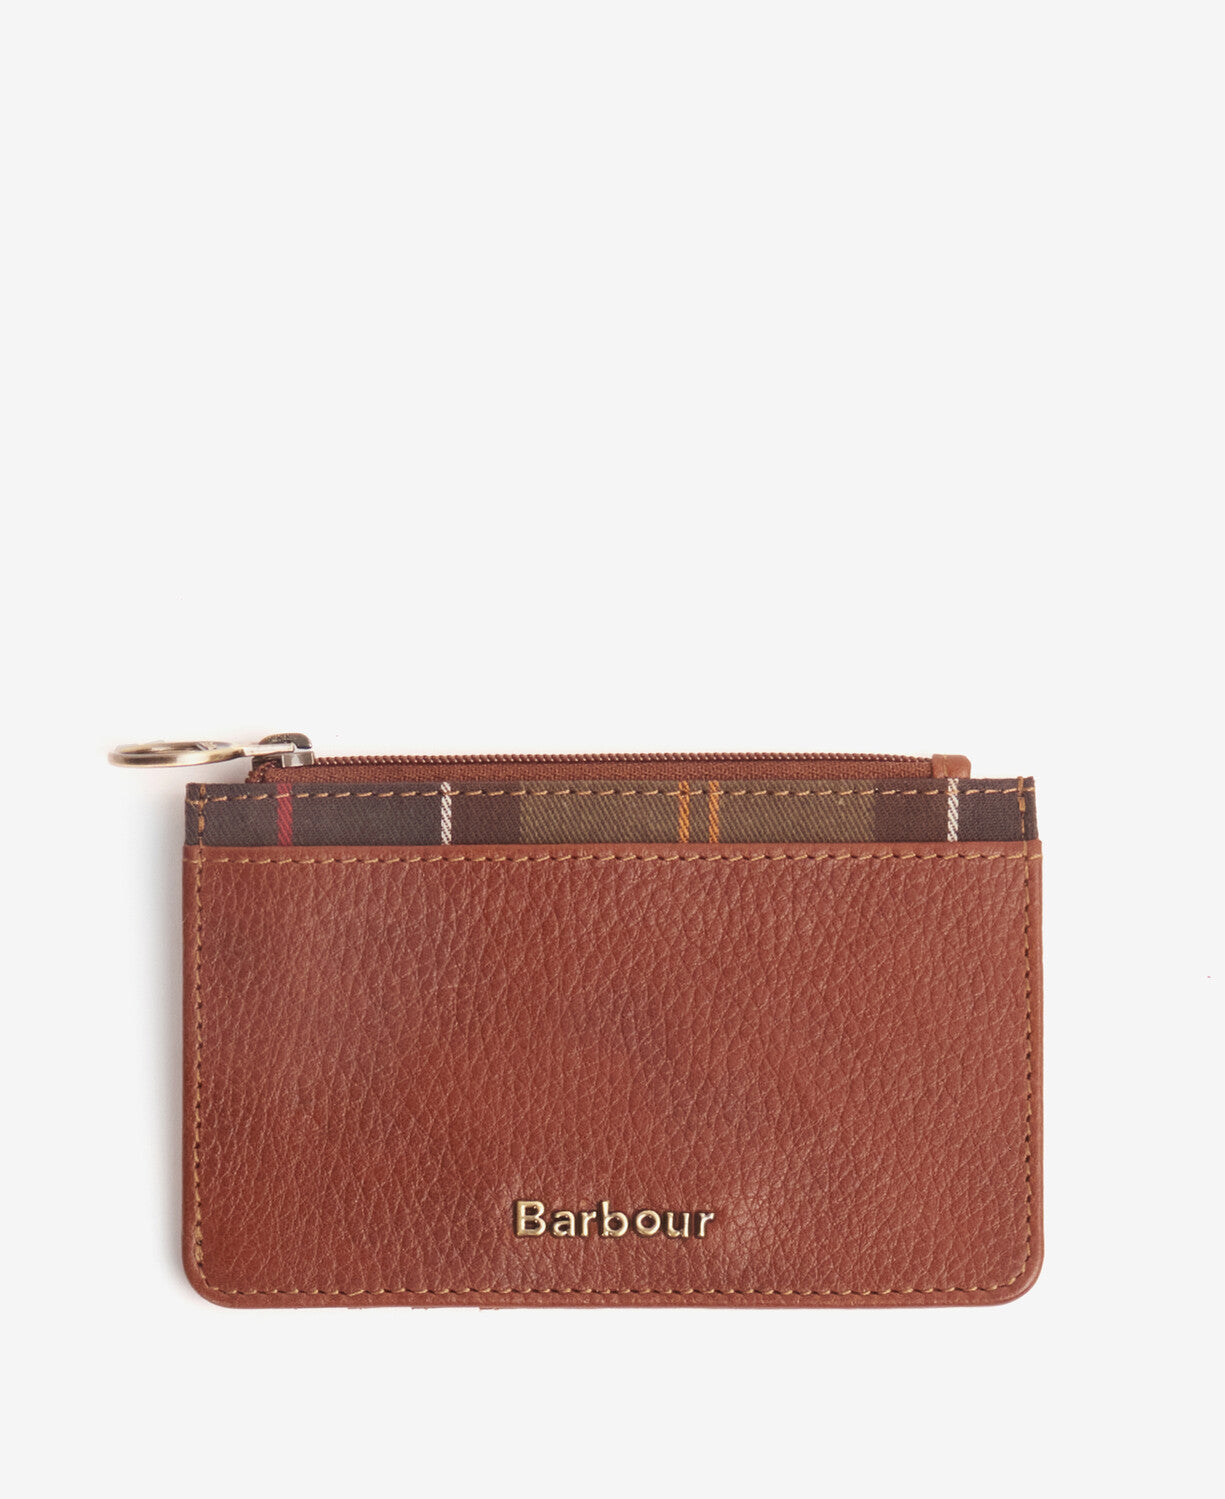 Barbour Laire Leather Card Holder - Brown/Classic